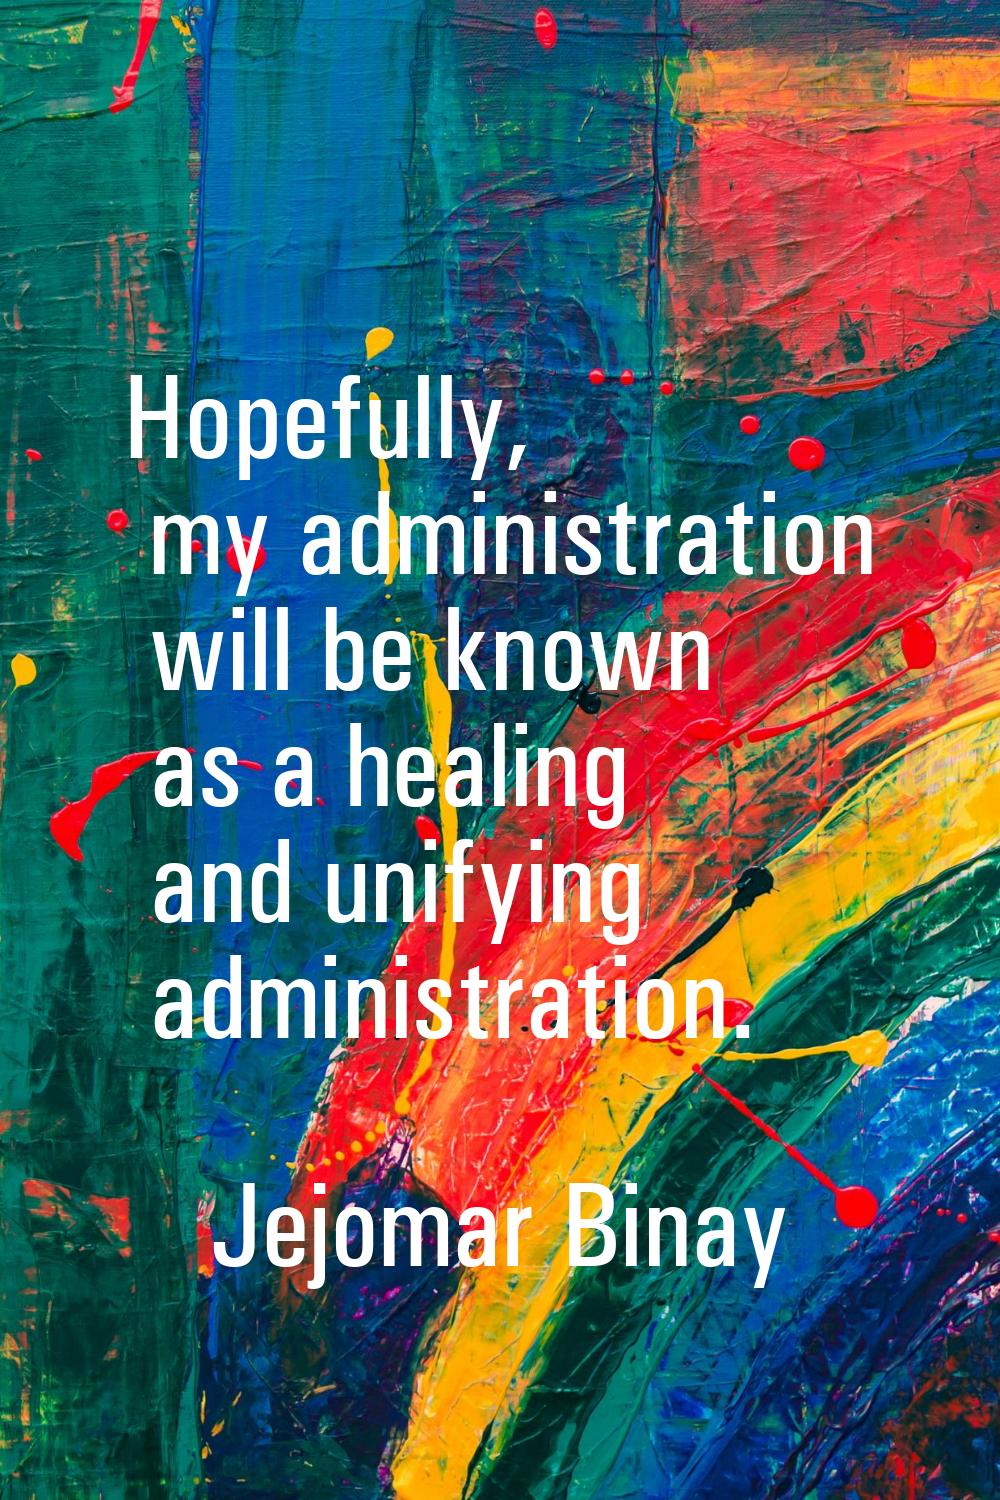 Hopefully, my administration will be known as a healing and unifying administration.